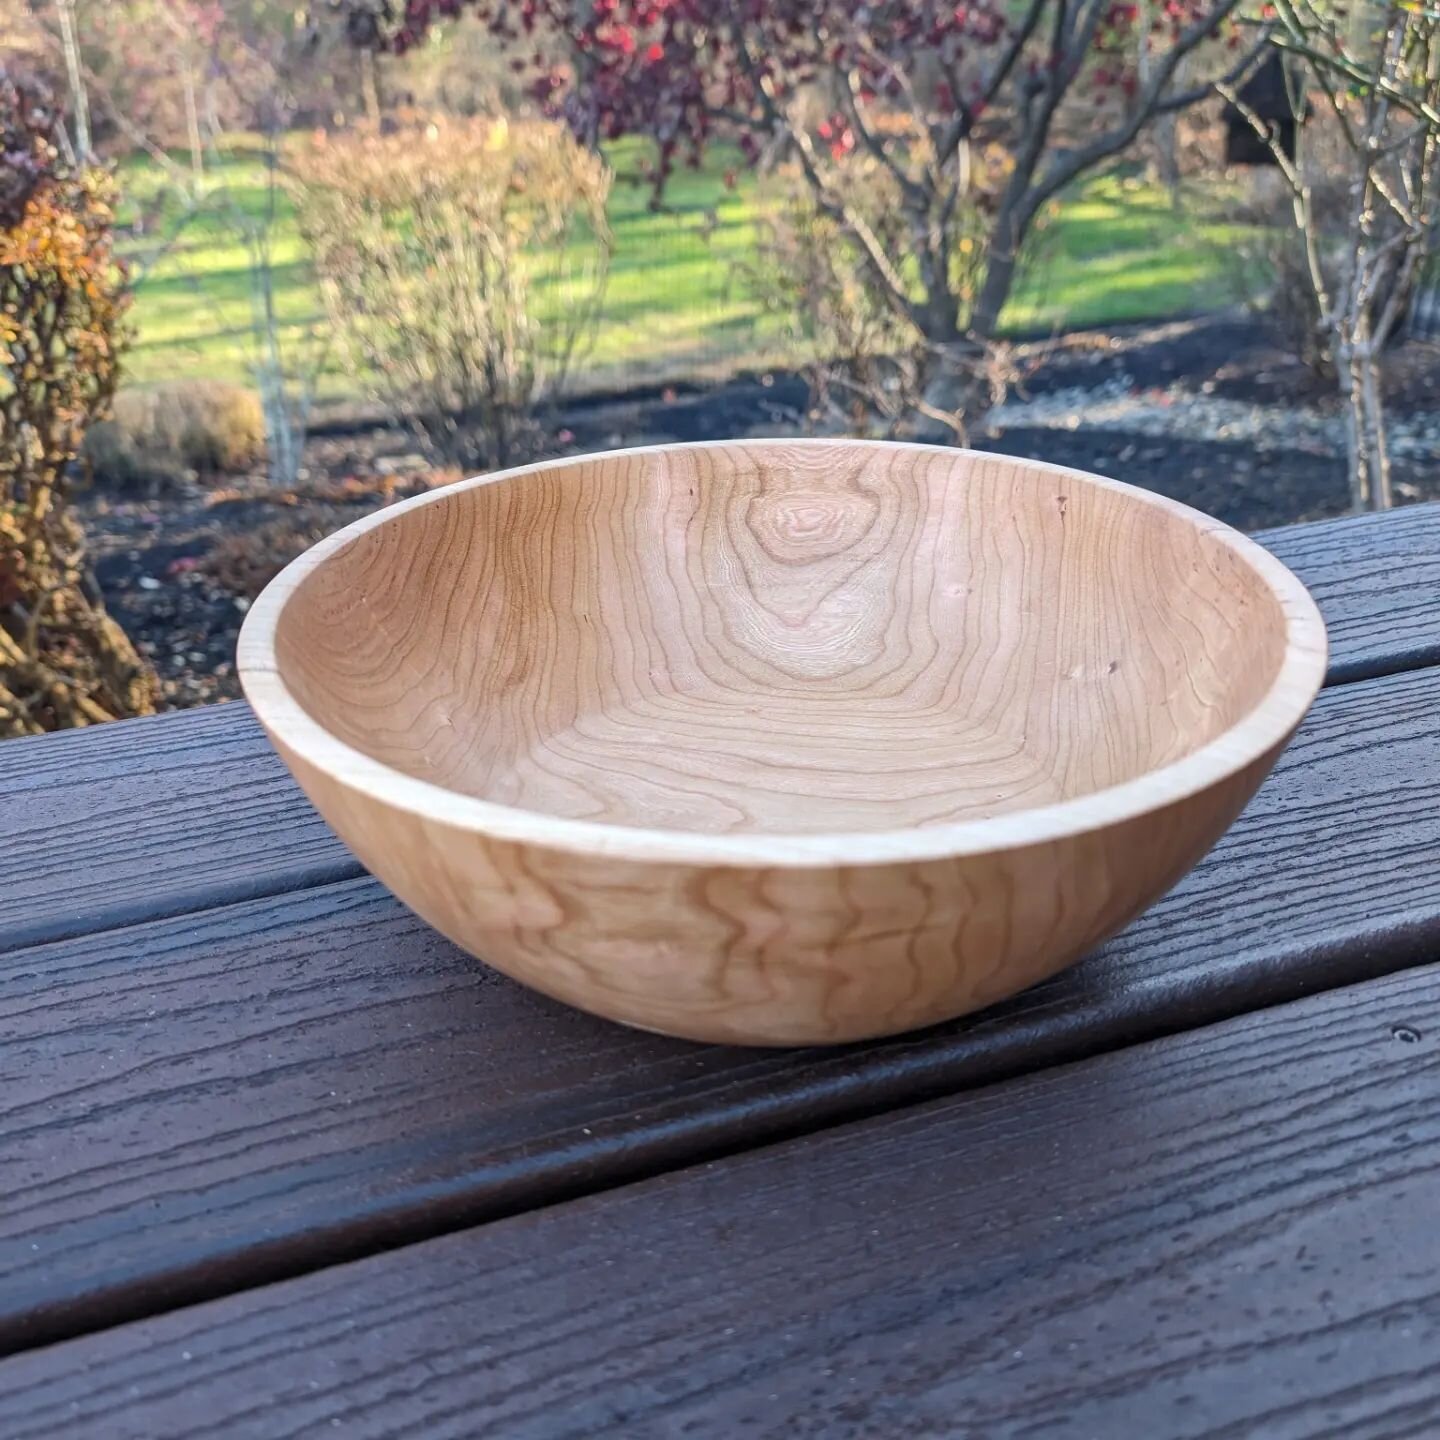 Cherry bowl

I made this beauty specifically for this weekends's @clovermarket holiday market. This is perfect for the cook in your family who is tough to buy gifts for. 

#woodworking